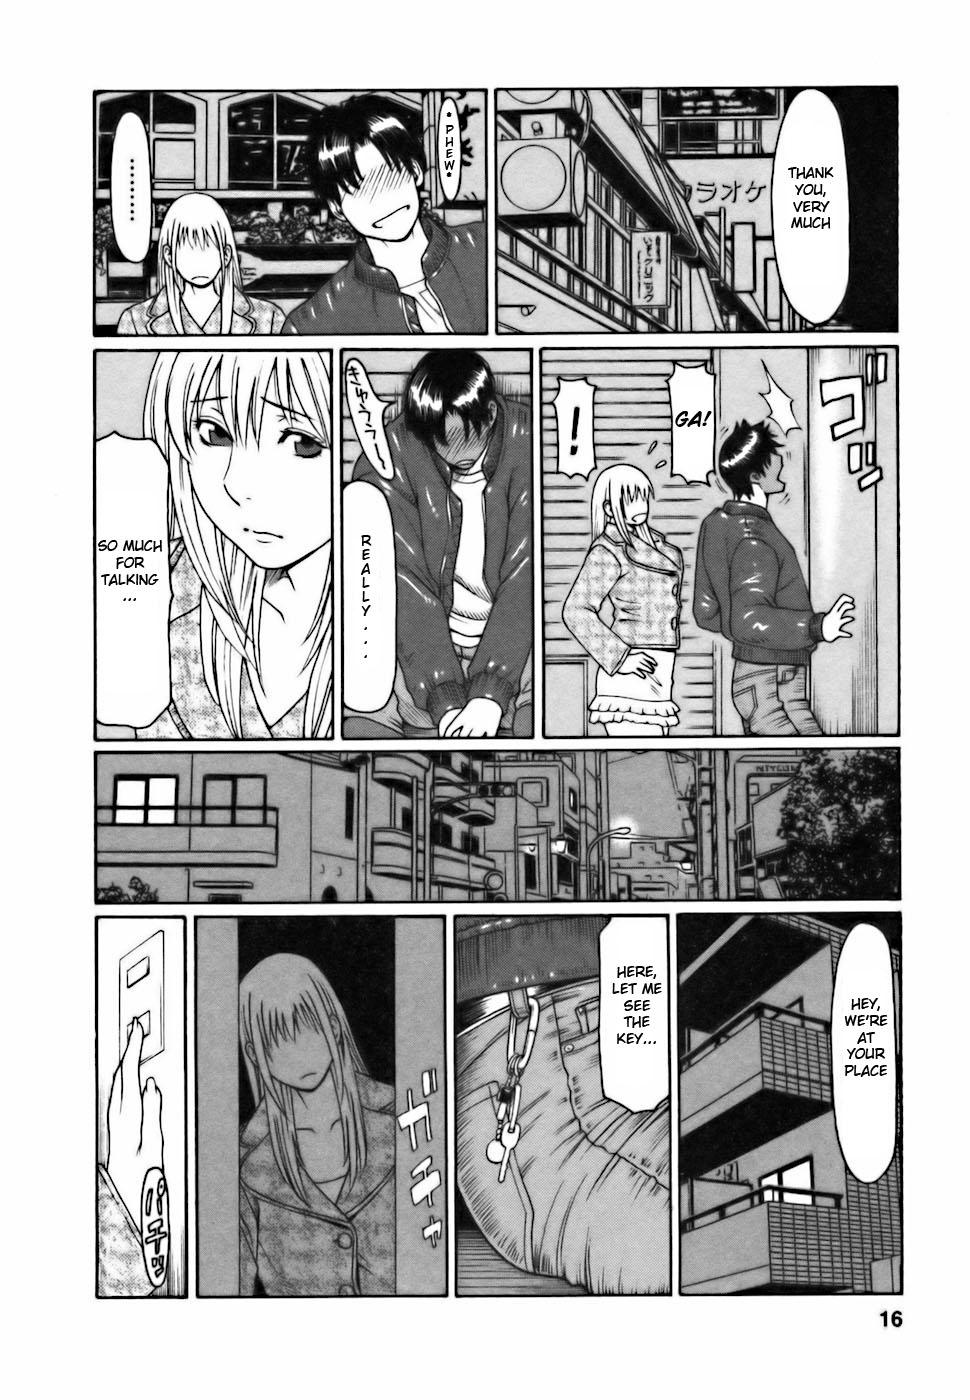 Cafe e Youkoso - Welcome To A Cafe Ch. 1 15